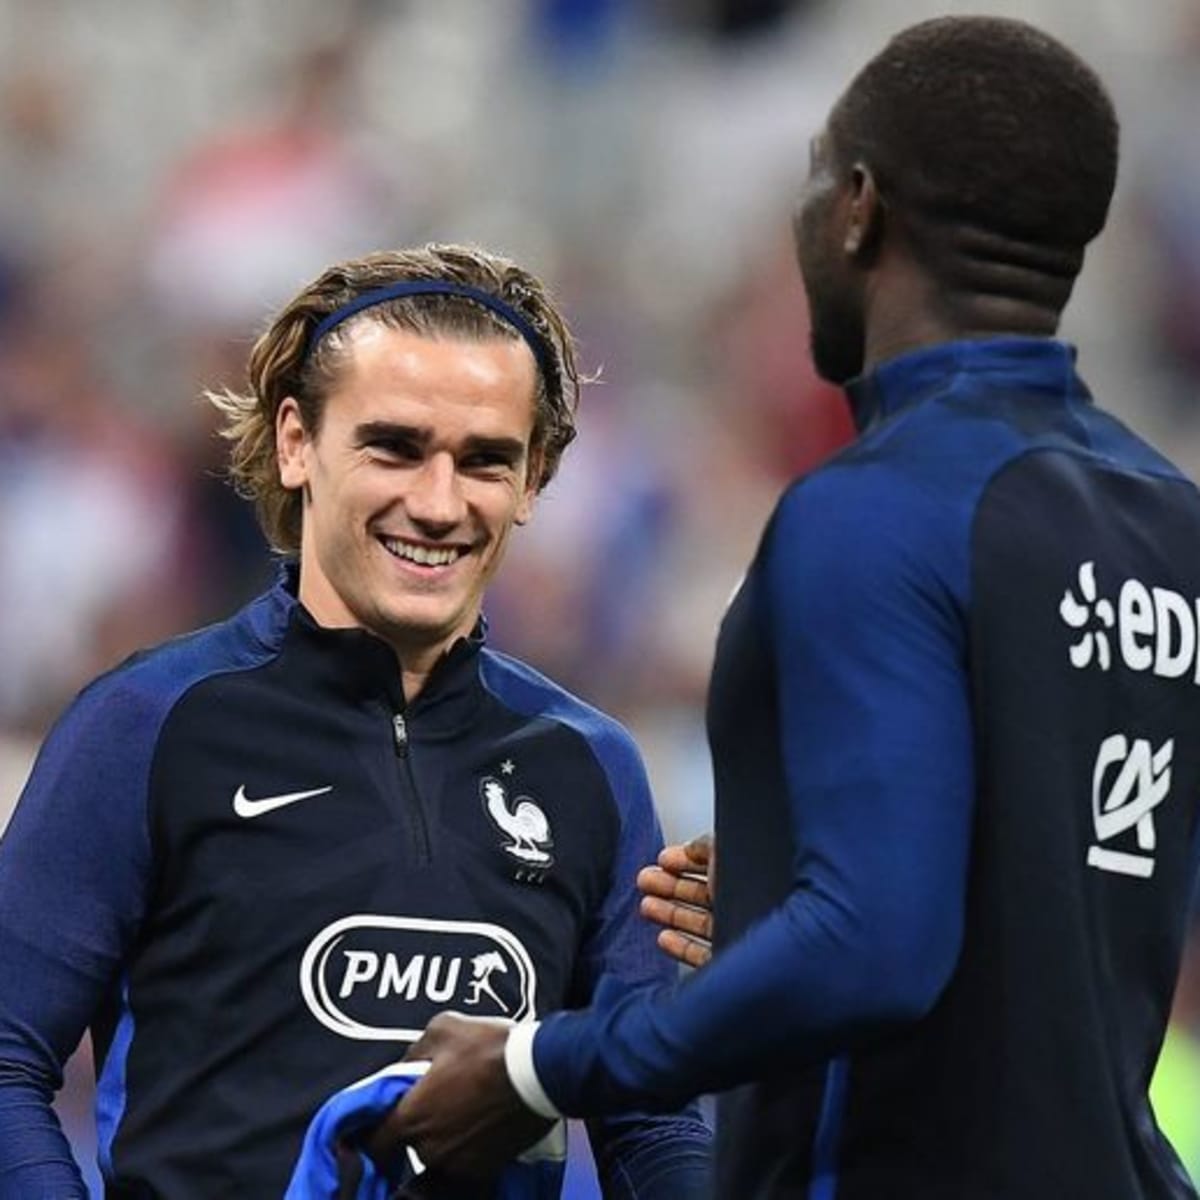 PHOTO: Griezmann Shocks World by Sporting Possibly the Worst Haircut in  History - Sports Illustrated